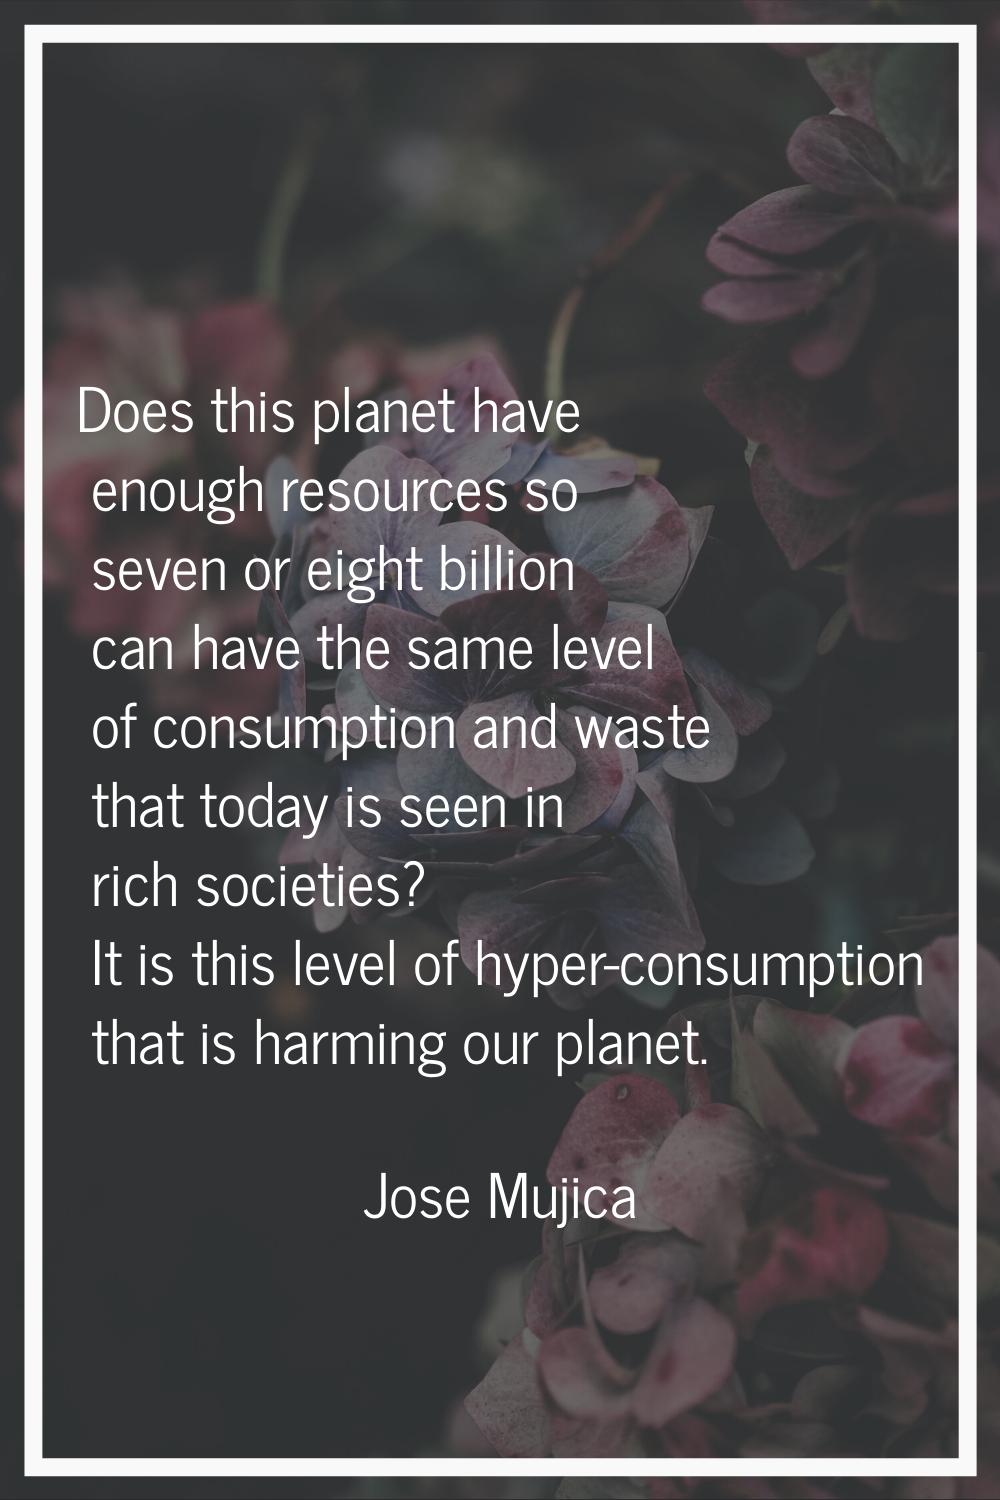 Does this planet have enough resources so seven or eight billion can have the same level of consump